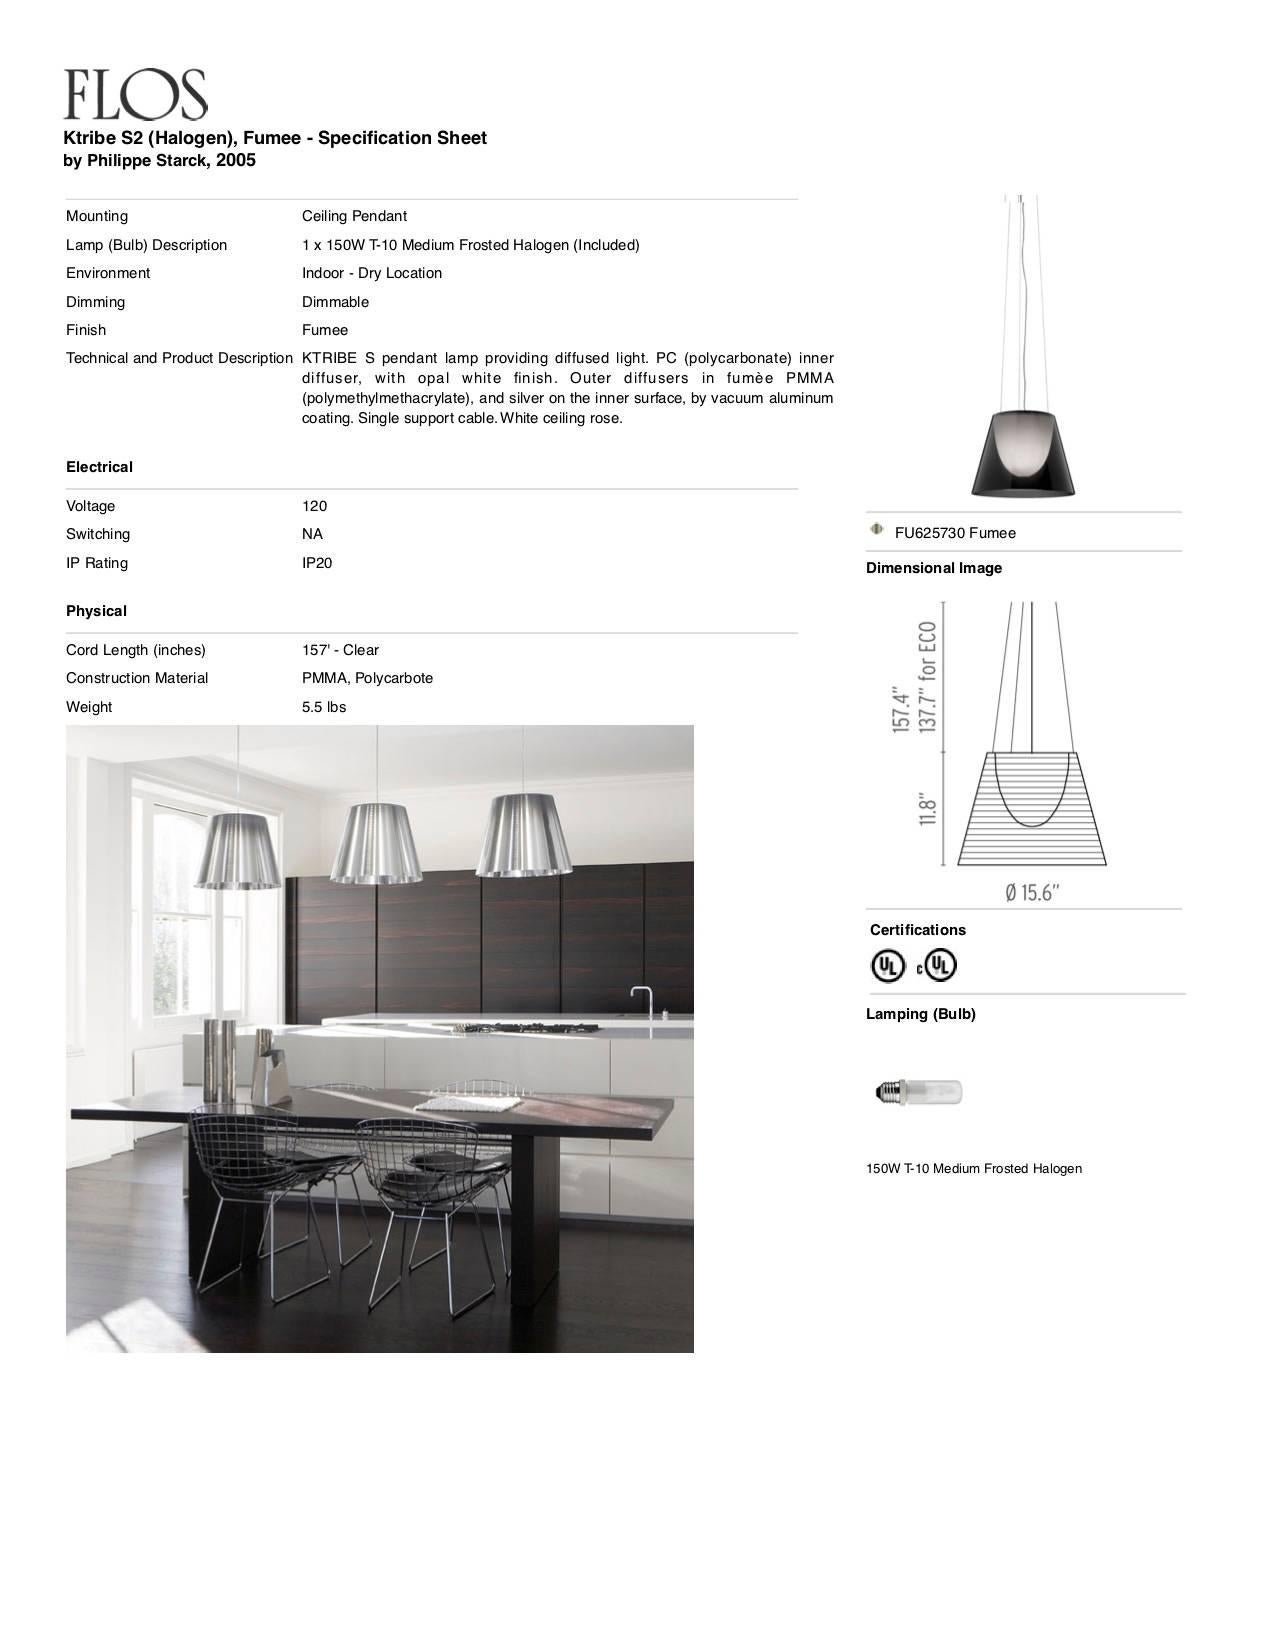 FLOS Ktribe S2 Halogen Pendant Light in Fumee by Philippe Starck In New Condition For Sale In Brooklyn, NY